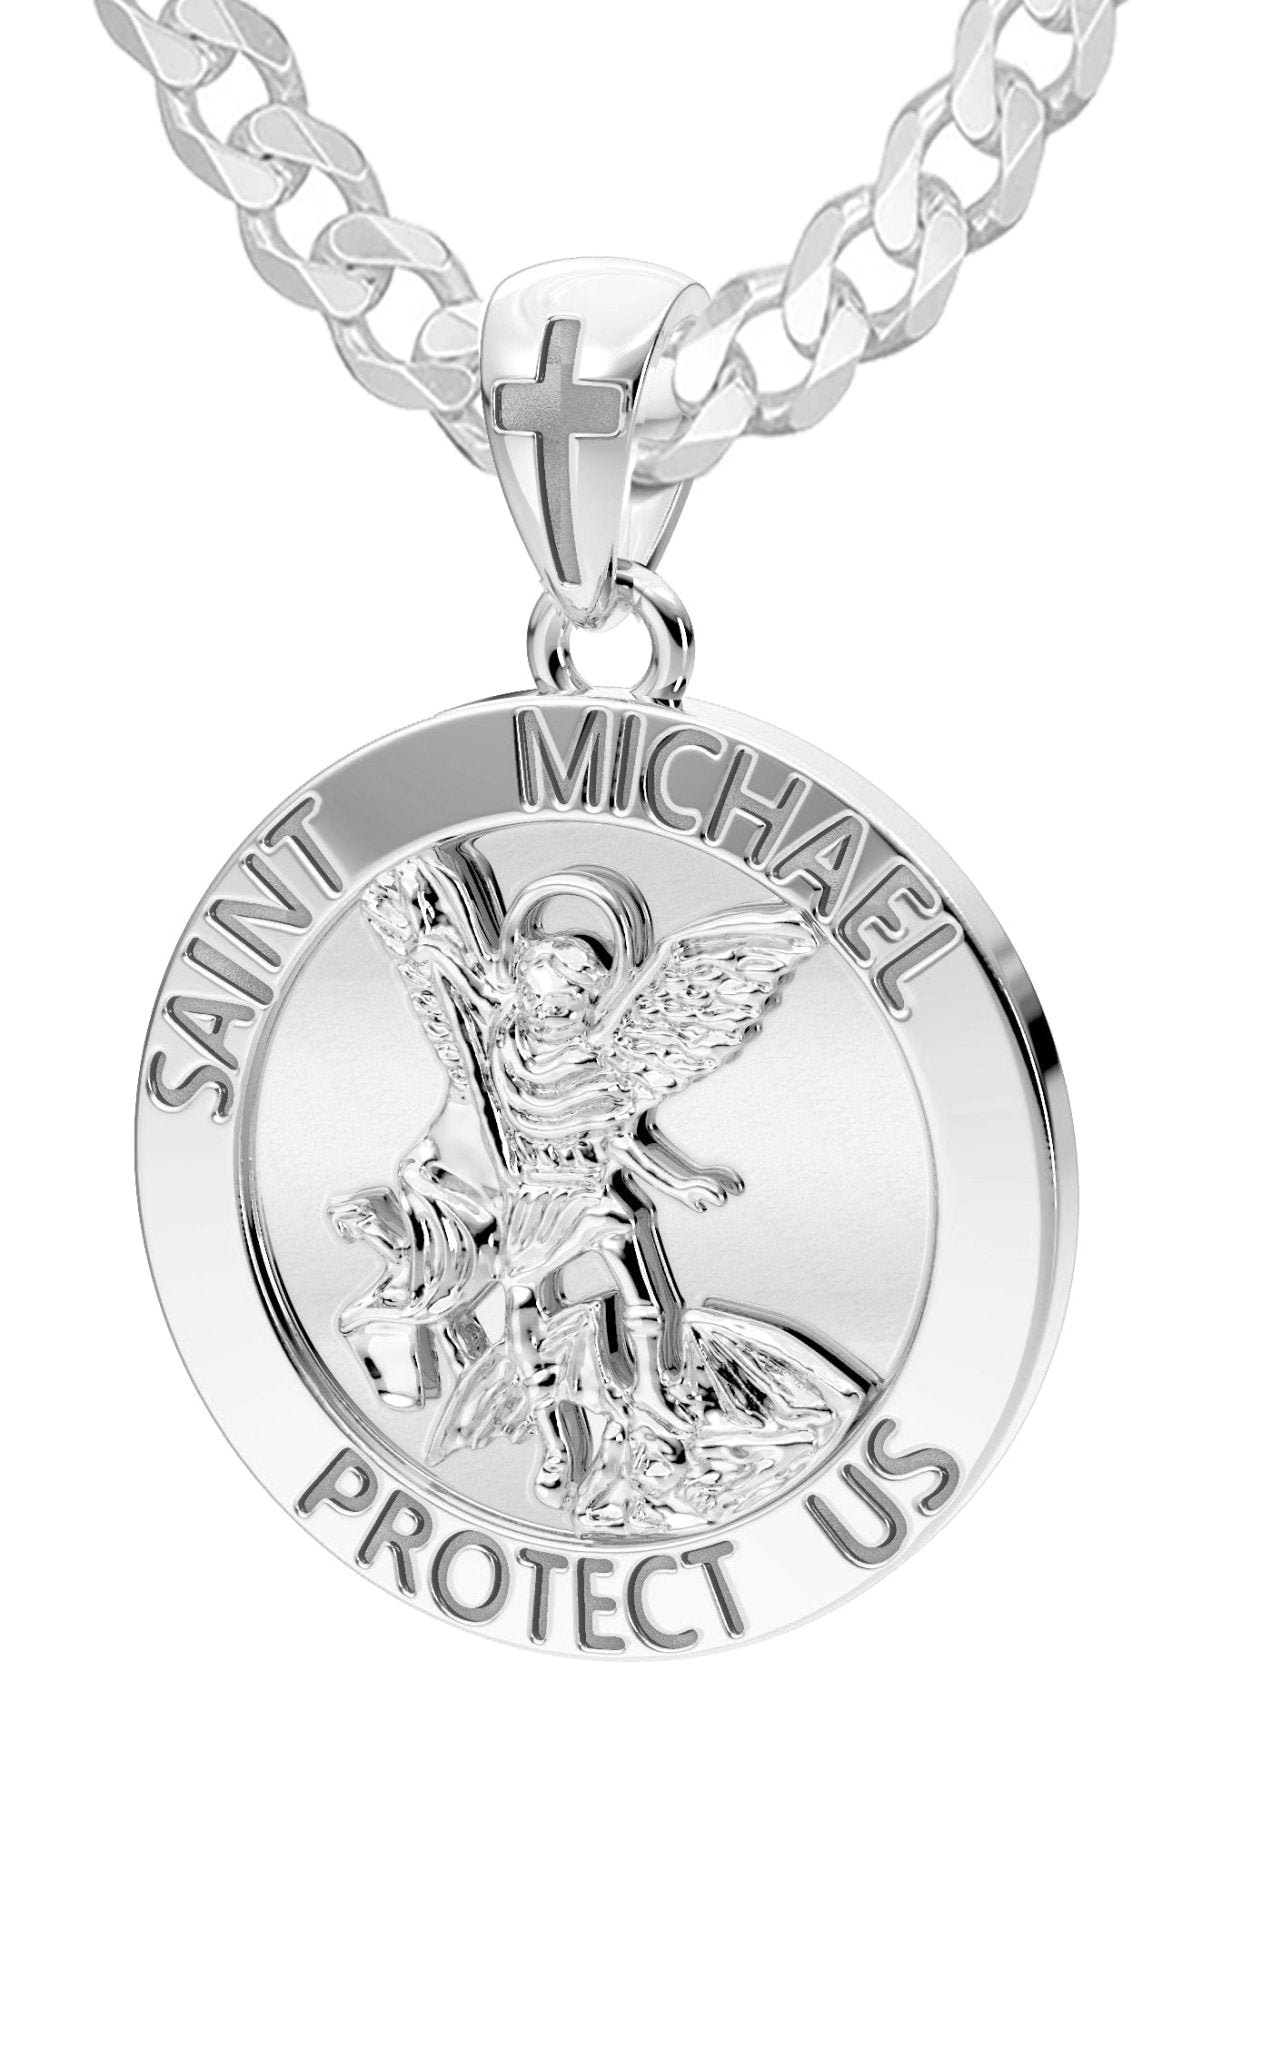 Men's 925 Sterling Silver Round Saint Michael High Polished Finish Medal Pendant, 25mm - US Jewels